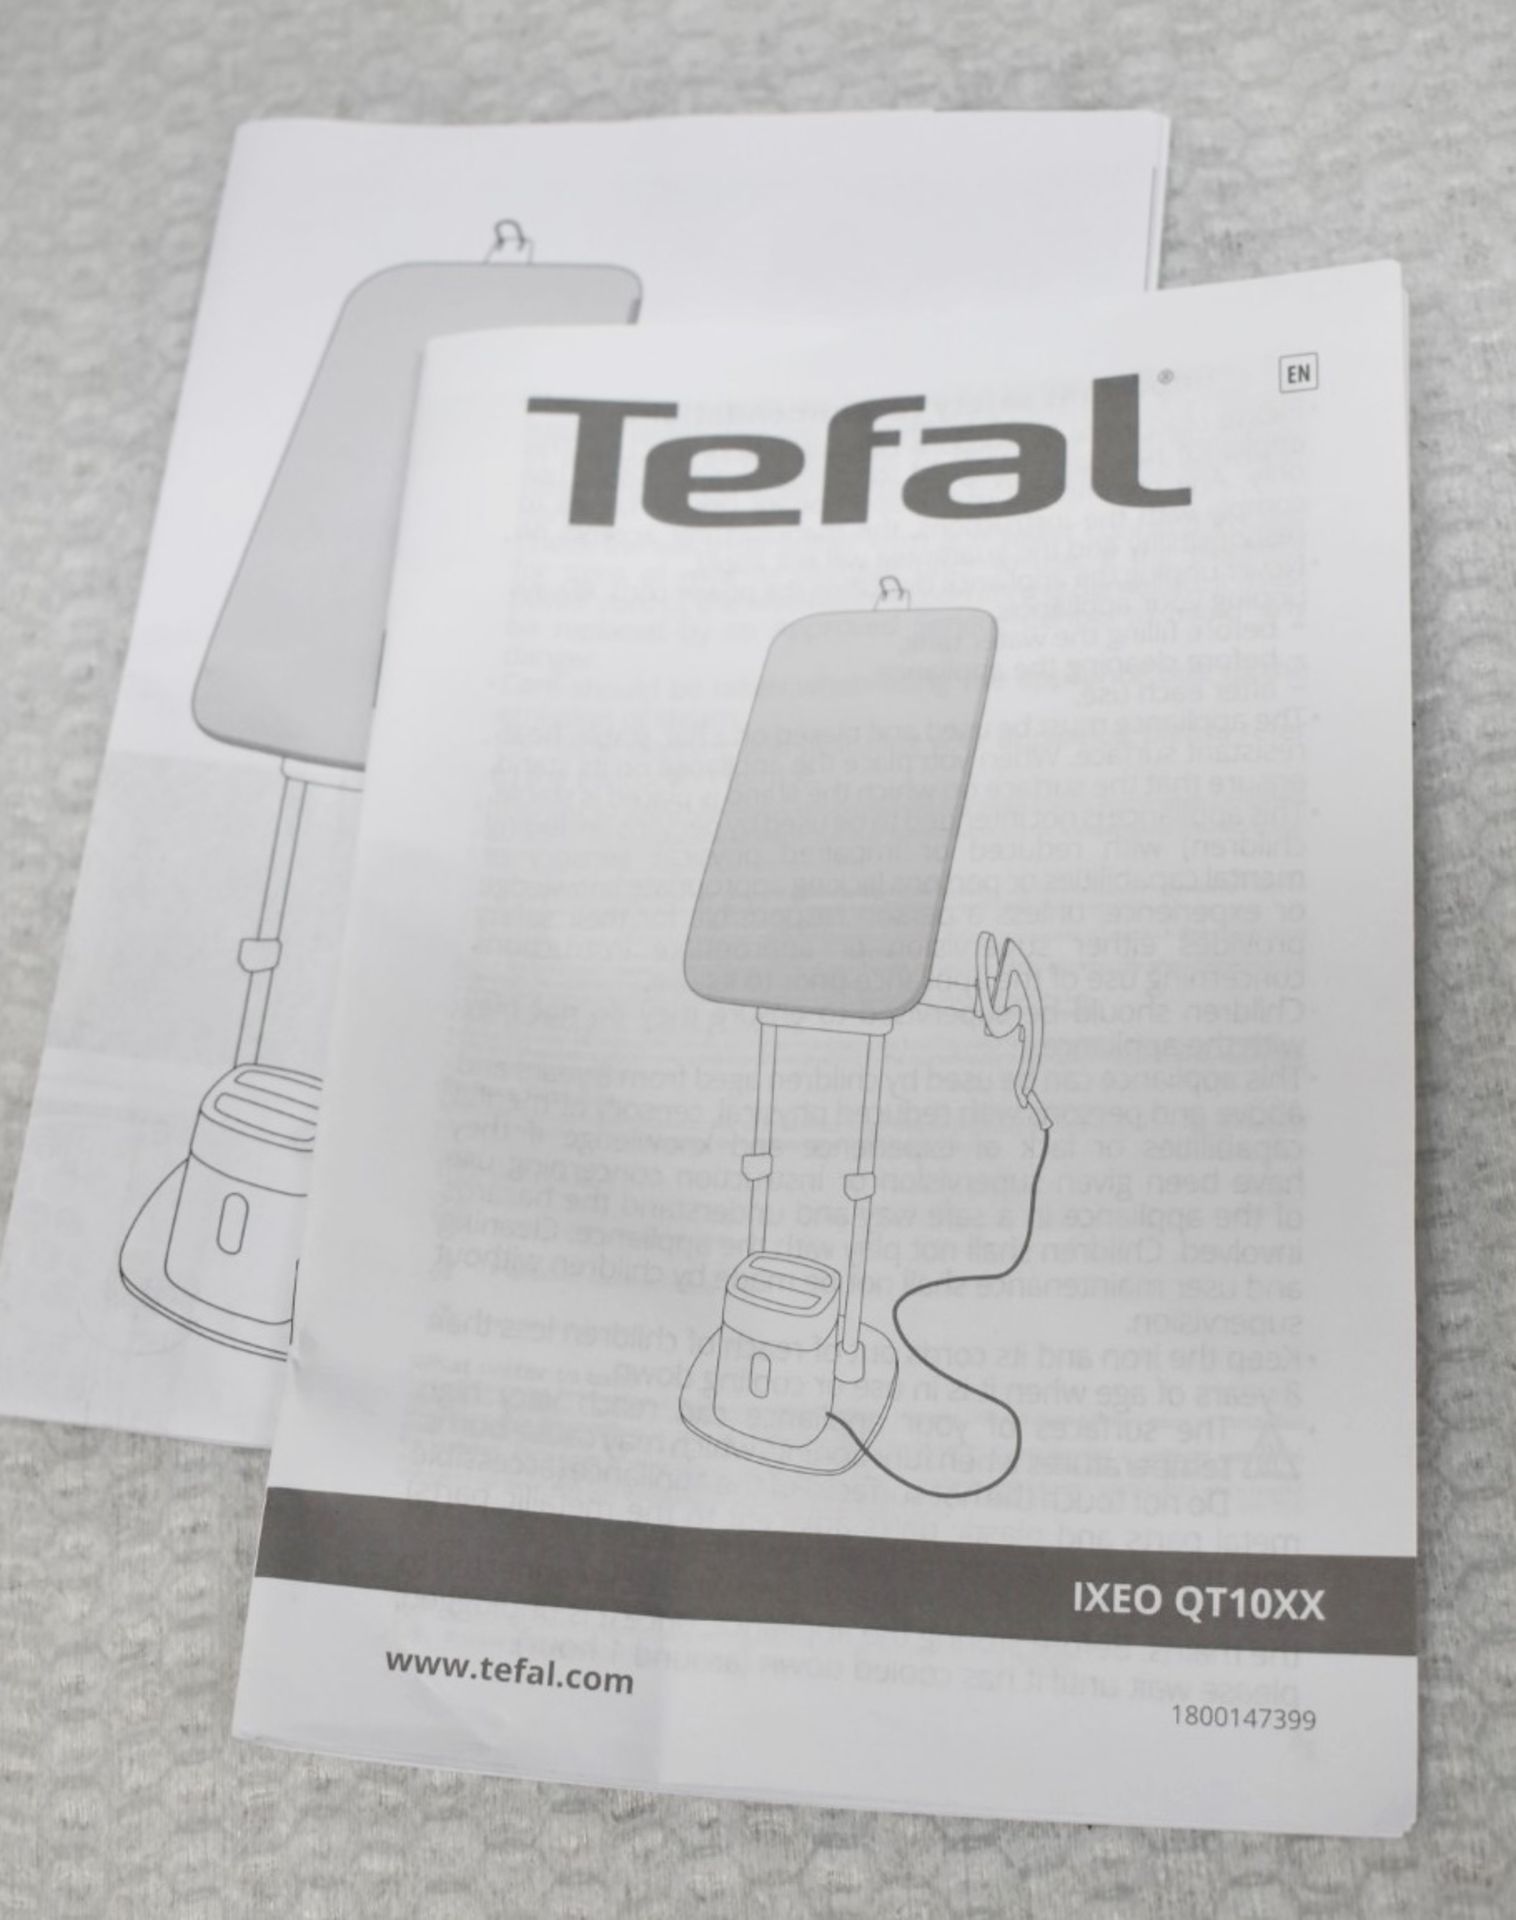 1 x TEFAL 'Ixeo' All-In-One Garment Steamer Solution - Original Price £289.99 - Unused Boxed Stock - Image 13 of 21